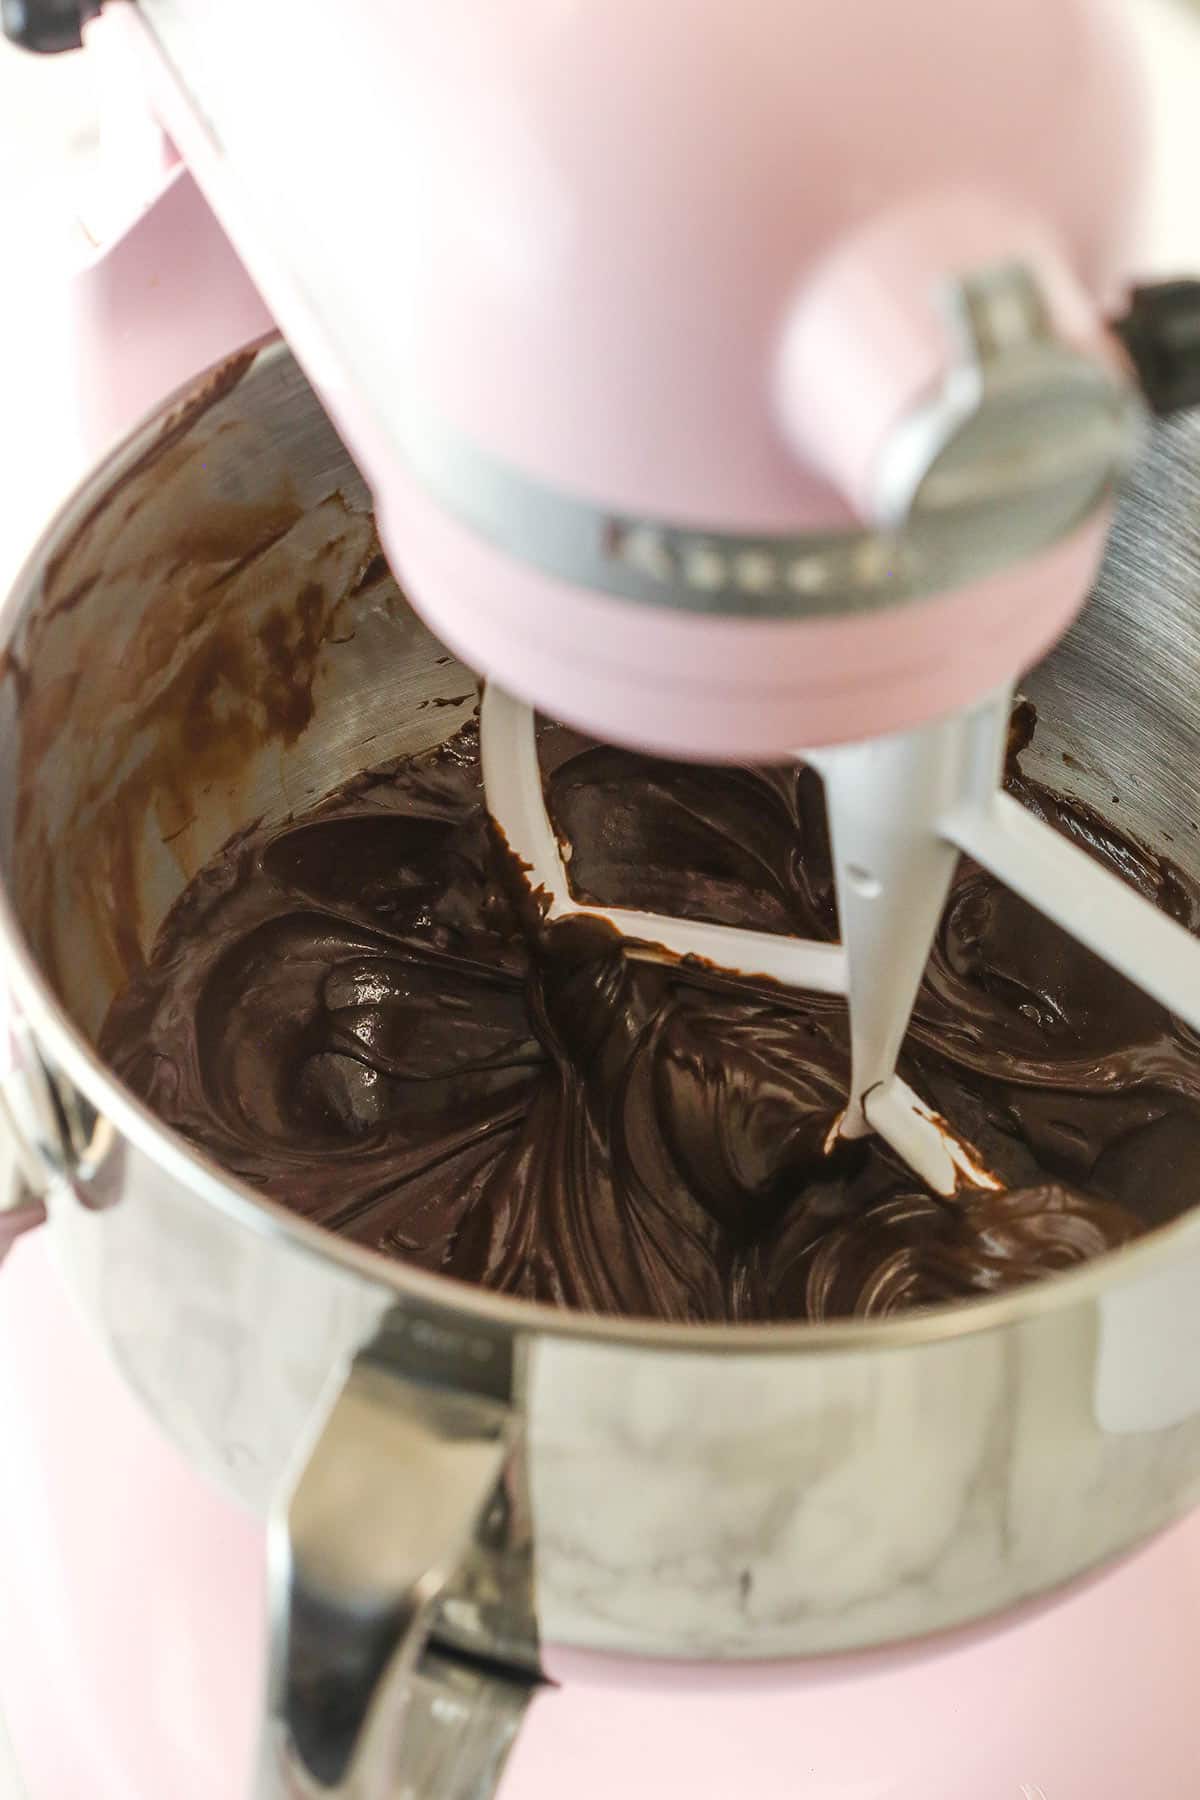 butter and melted chocolate combined in bowl of stand mixer